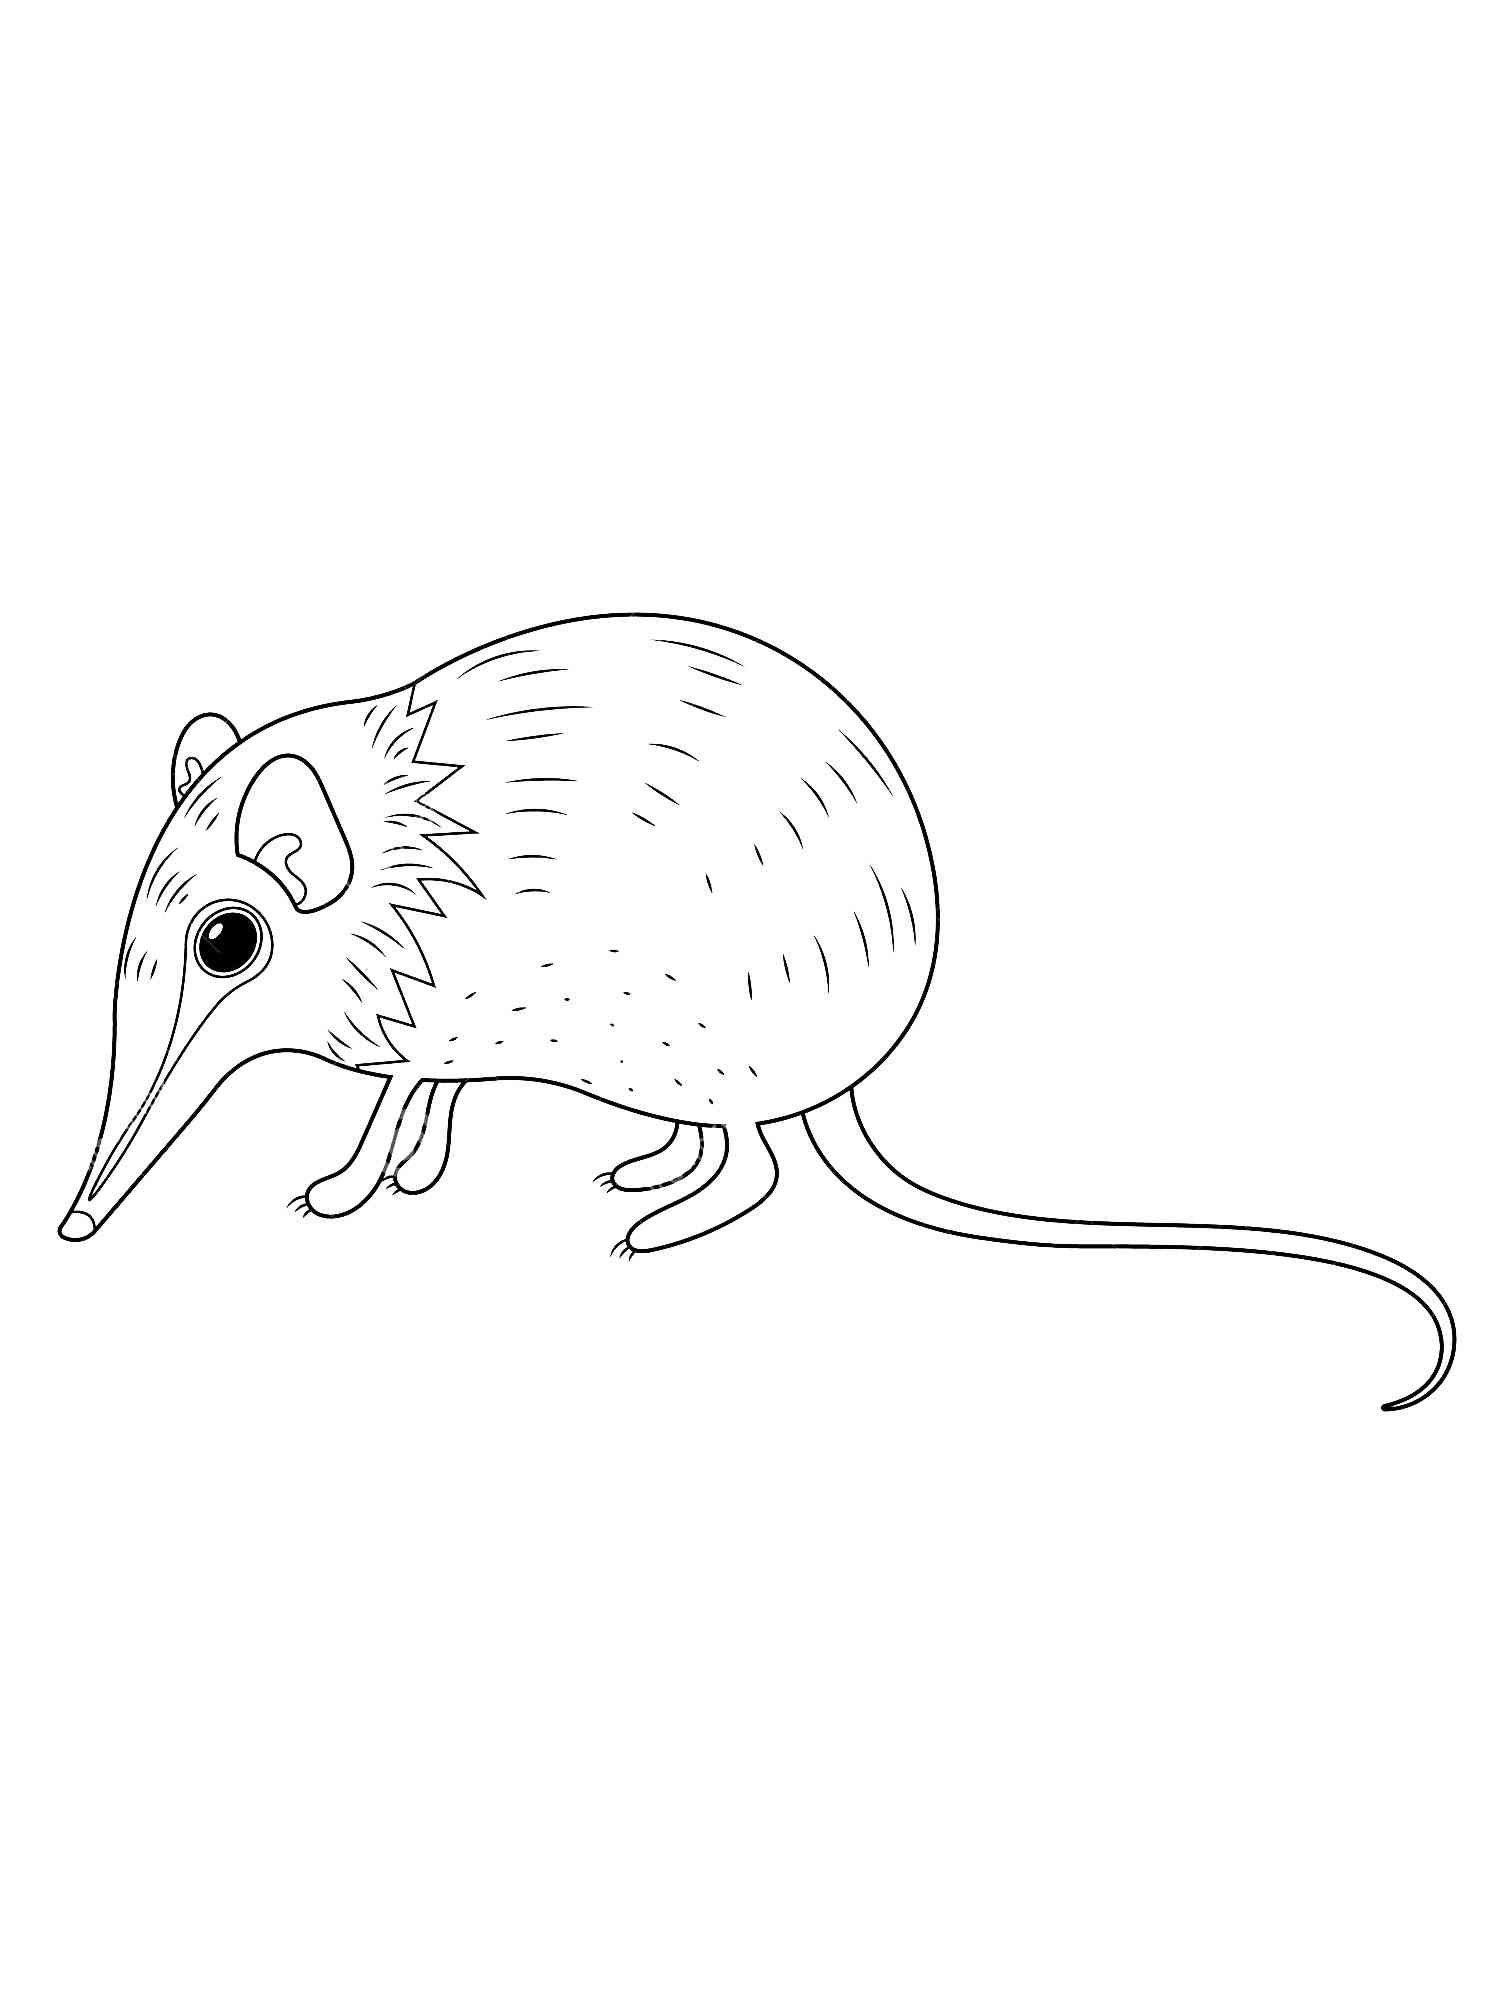 Funny Shrew coloring page